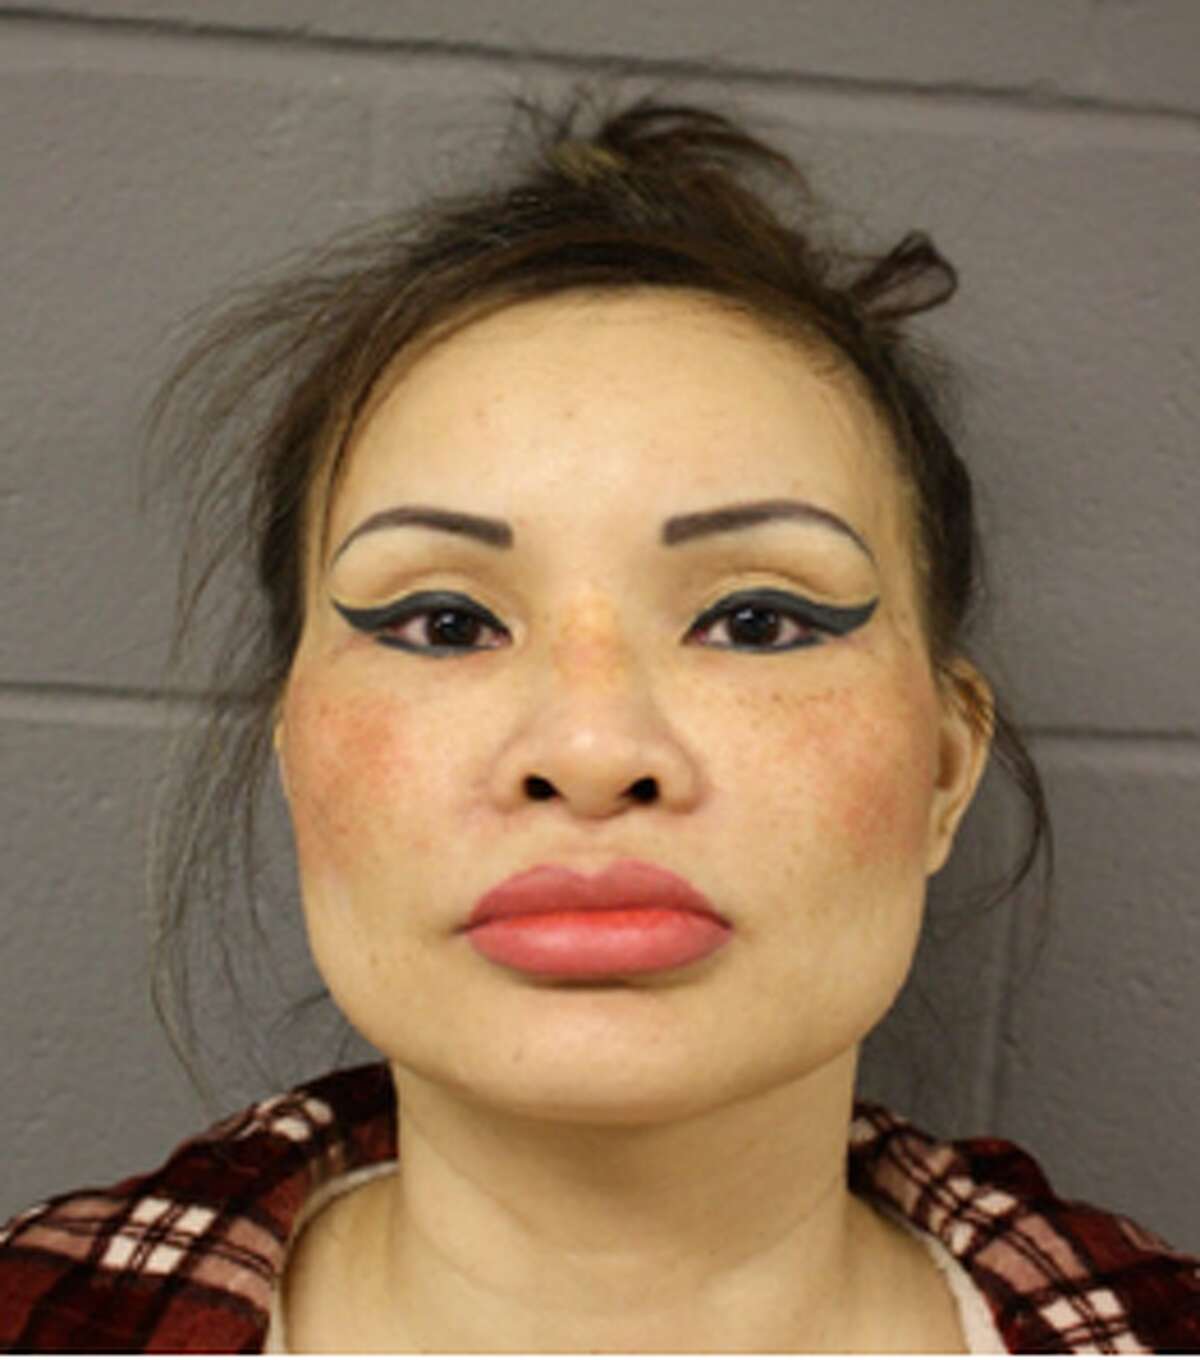 Nude Woman Arrested In Undercover Houston Massage Parlor Sting 4945